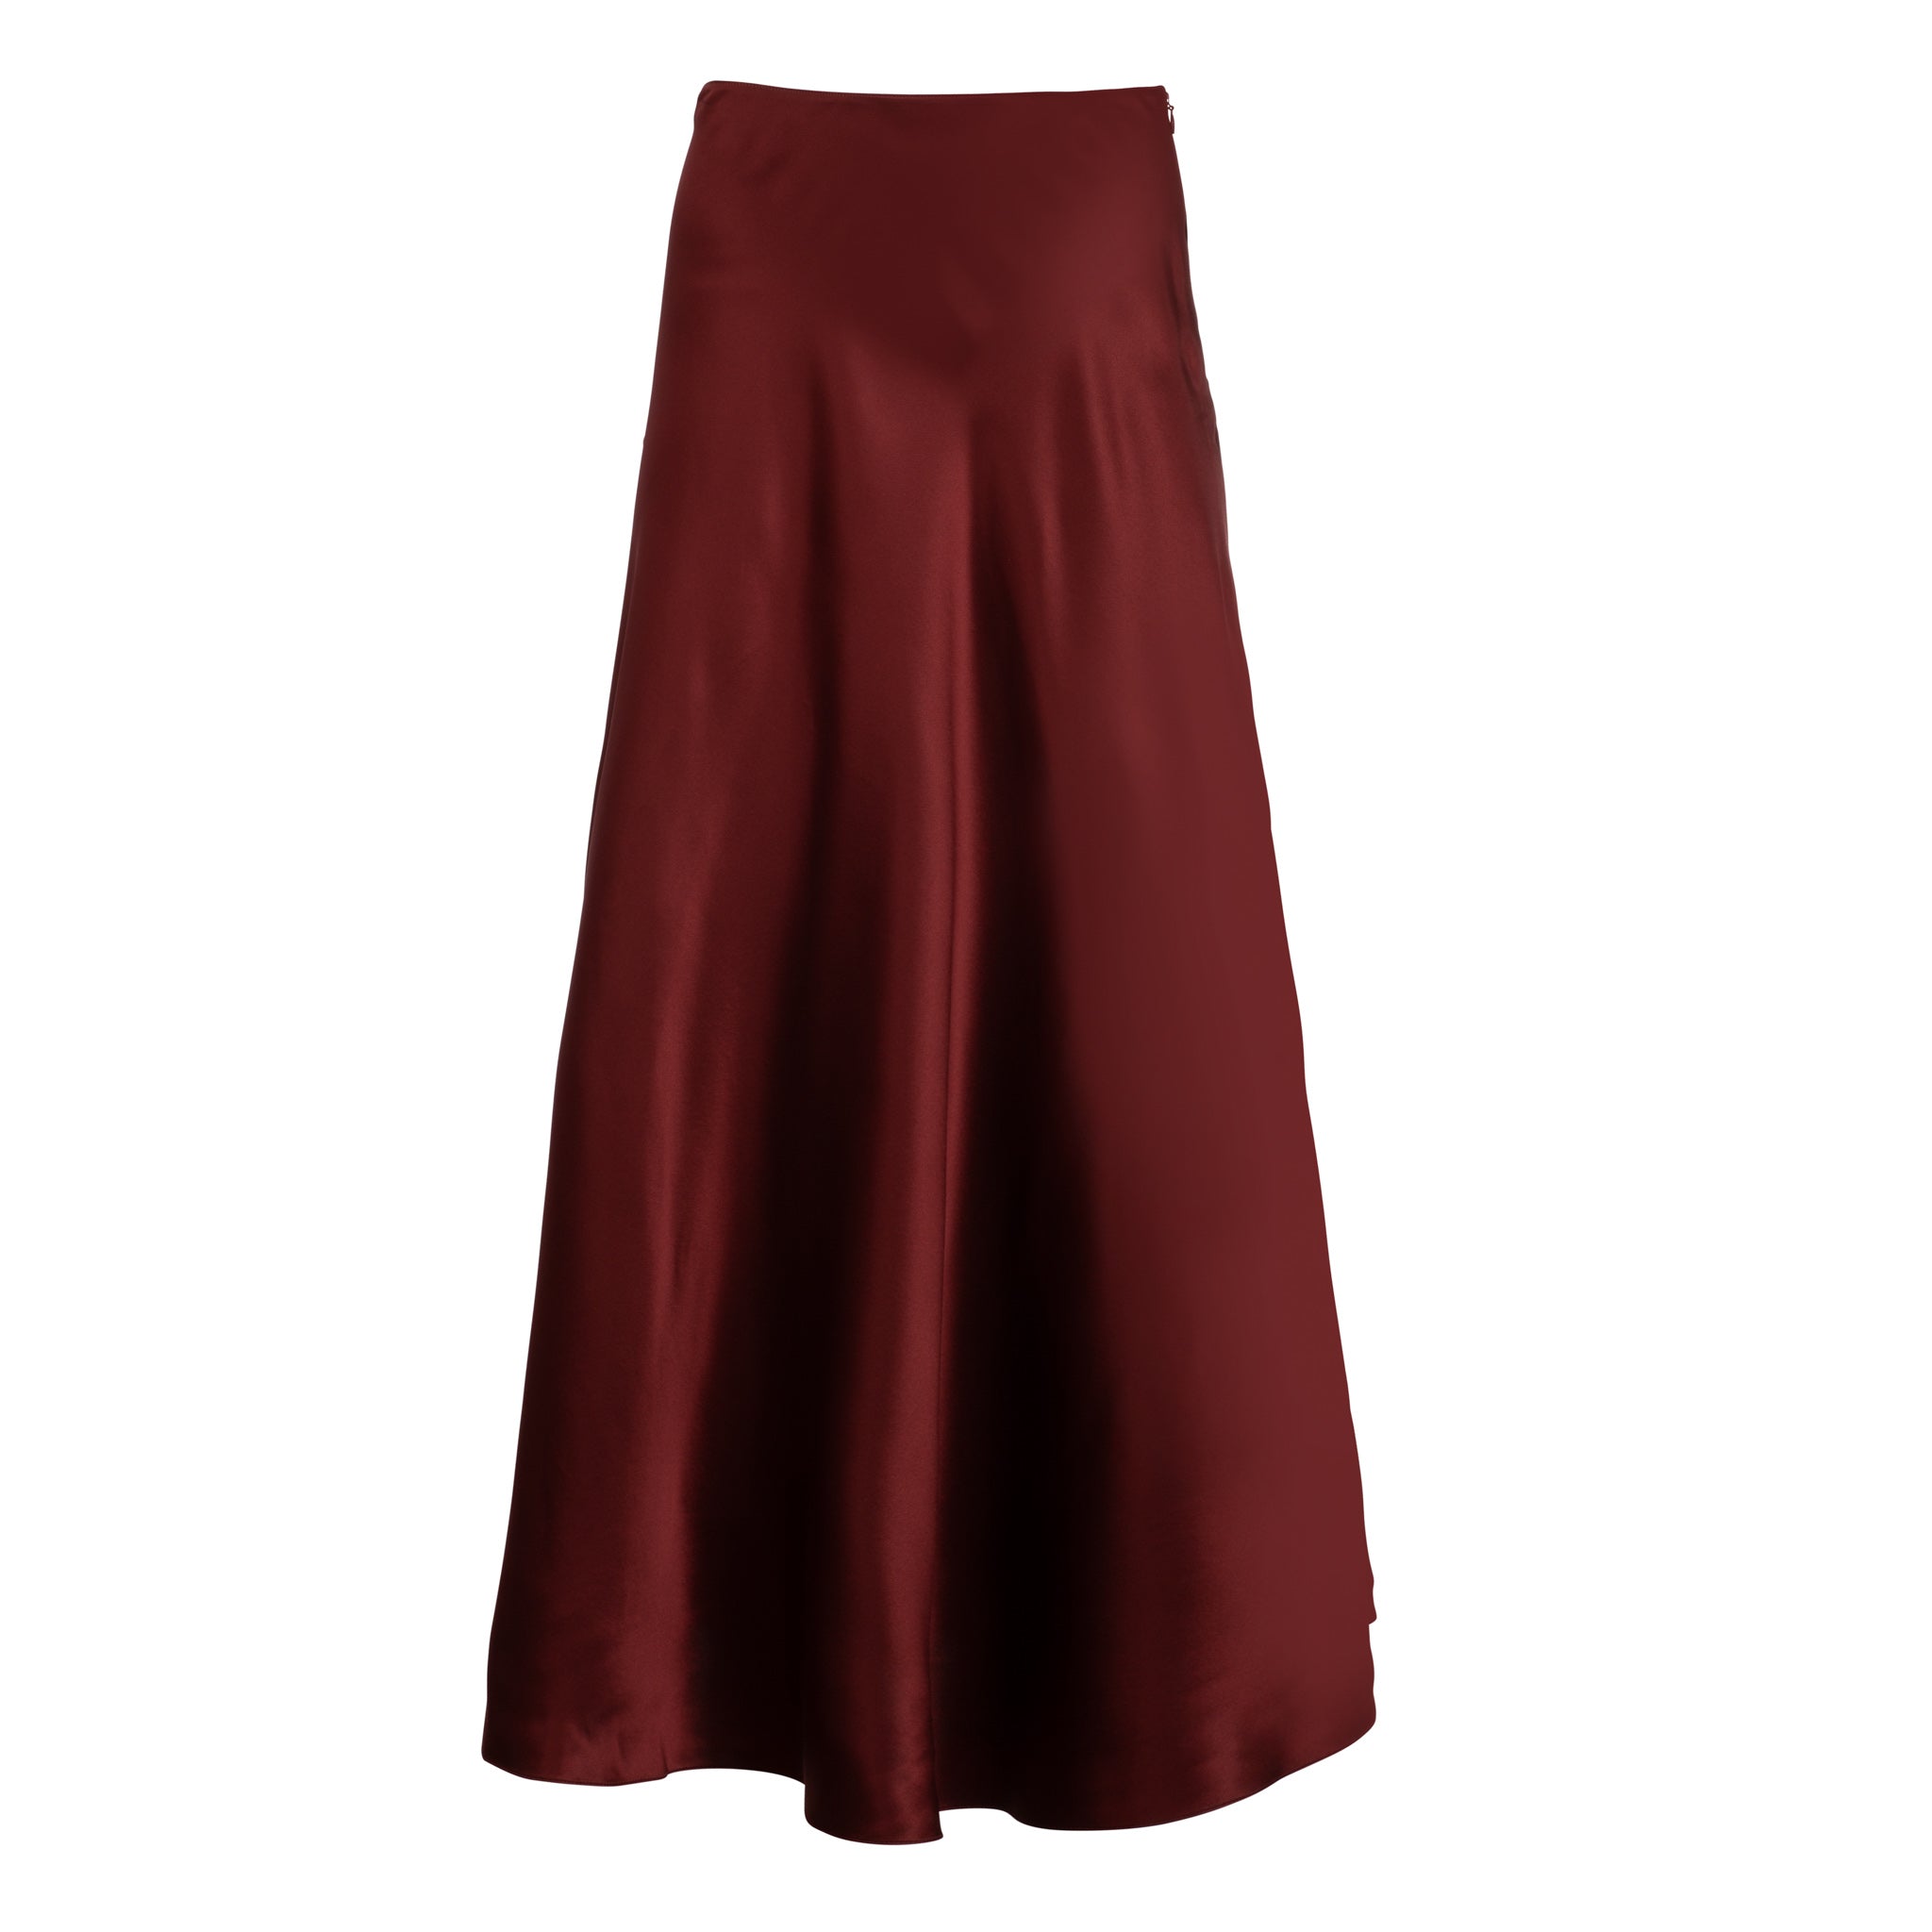 Buy H&M Textured Weave Wrap Skirt - Skirts for Women 22494404 | Myntra